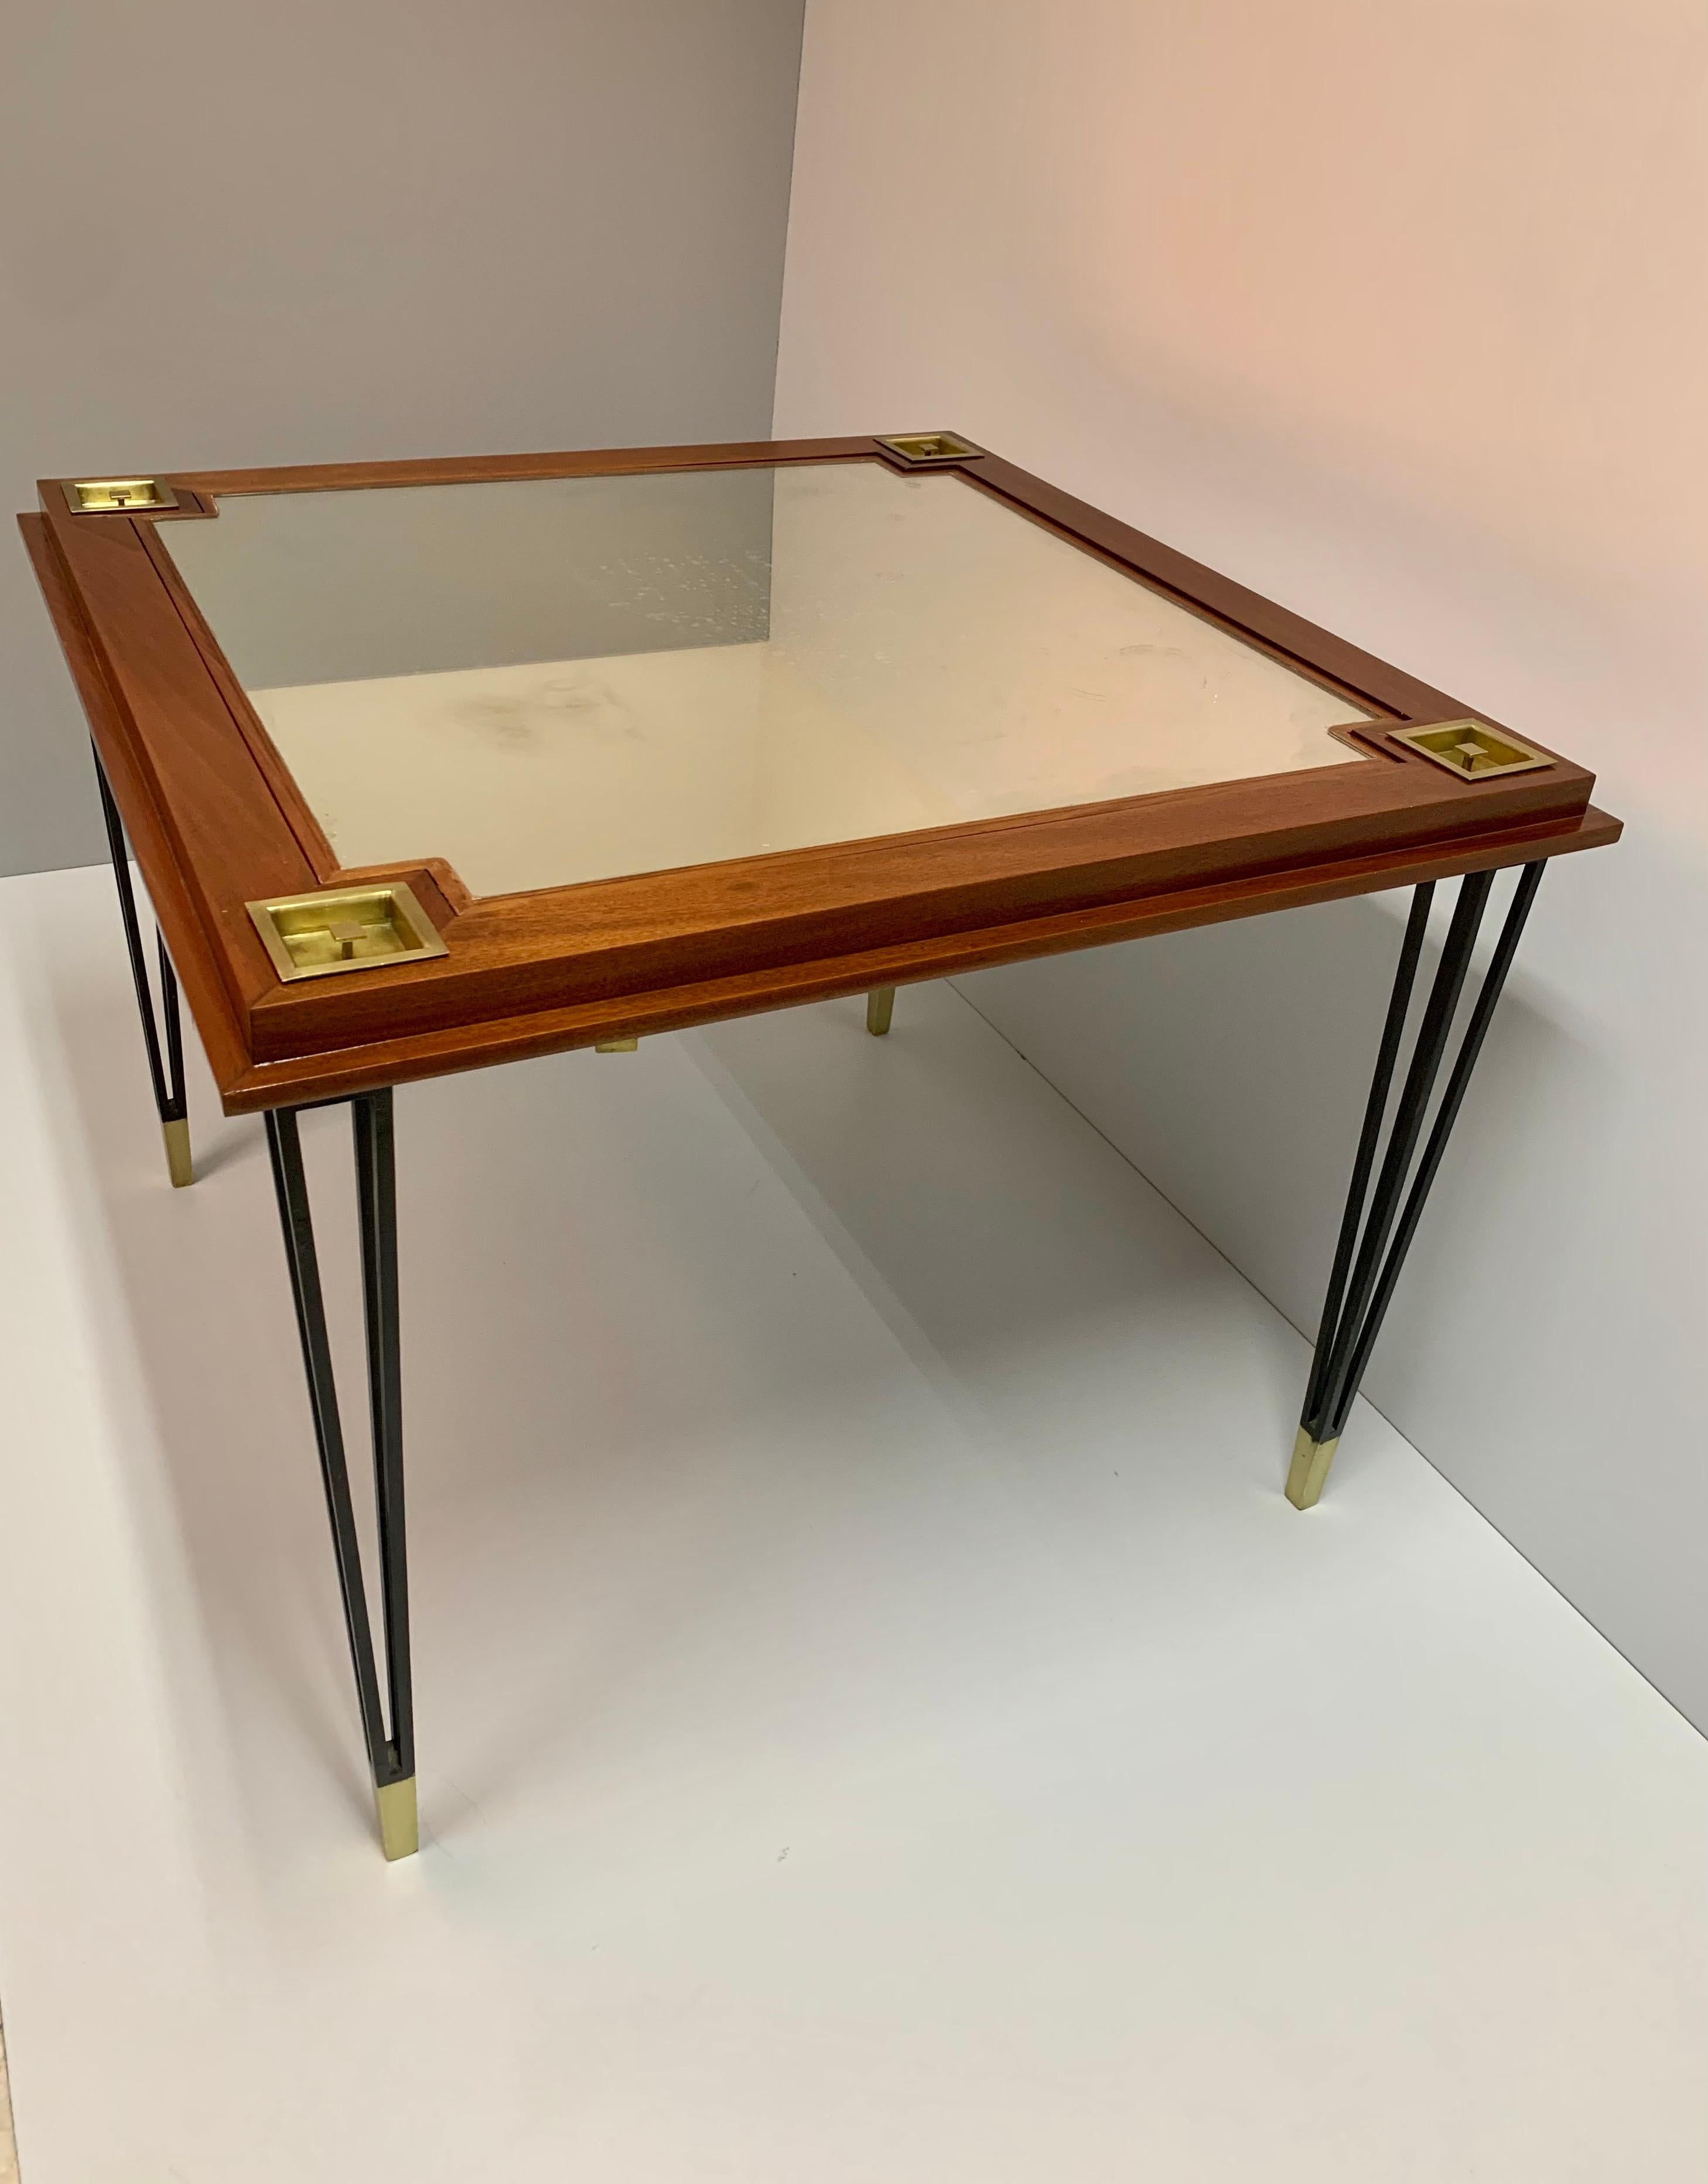 The authenticity of this piece is supported by documents signed by Mito Block from 1953. They are available upon request.
Square game table designed by the Block brothers in 1953, it has two sides, one is the original mirror and on the other side